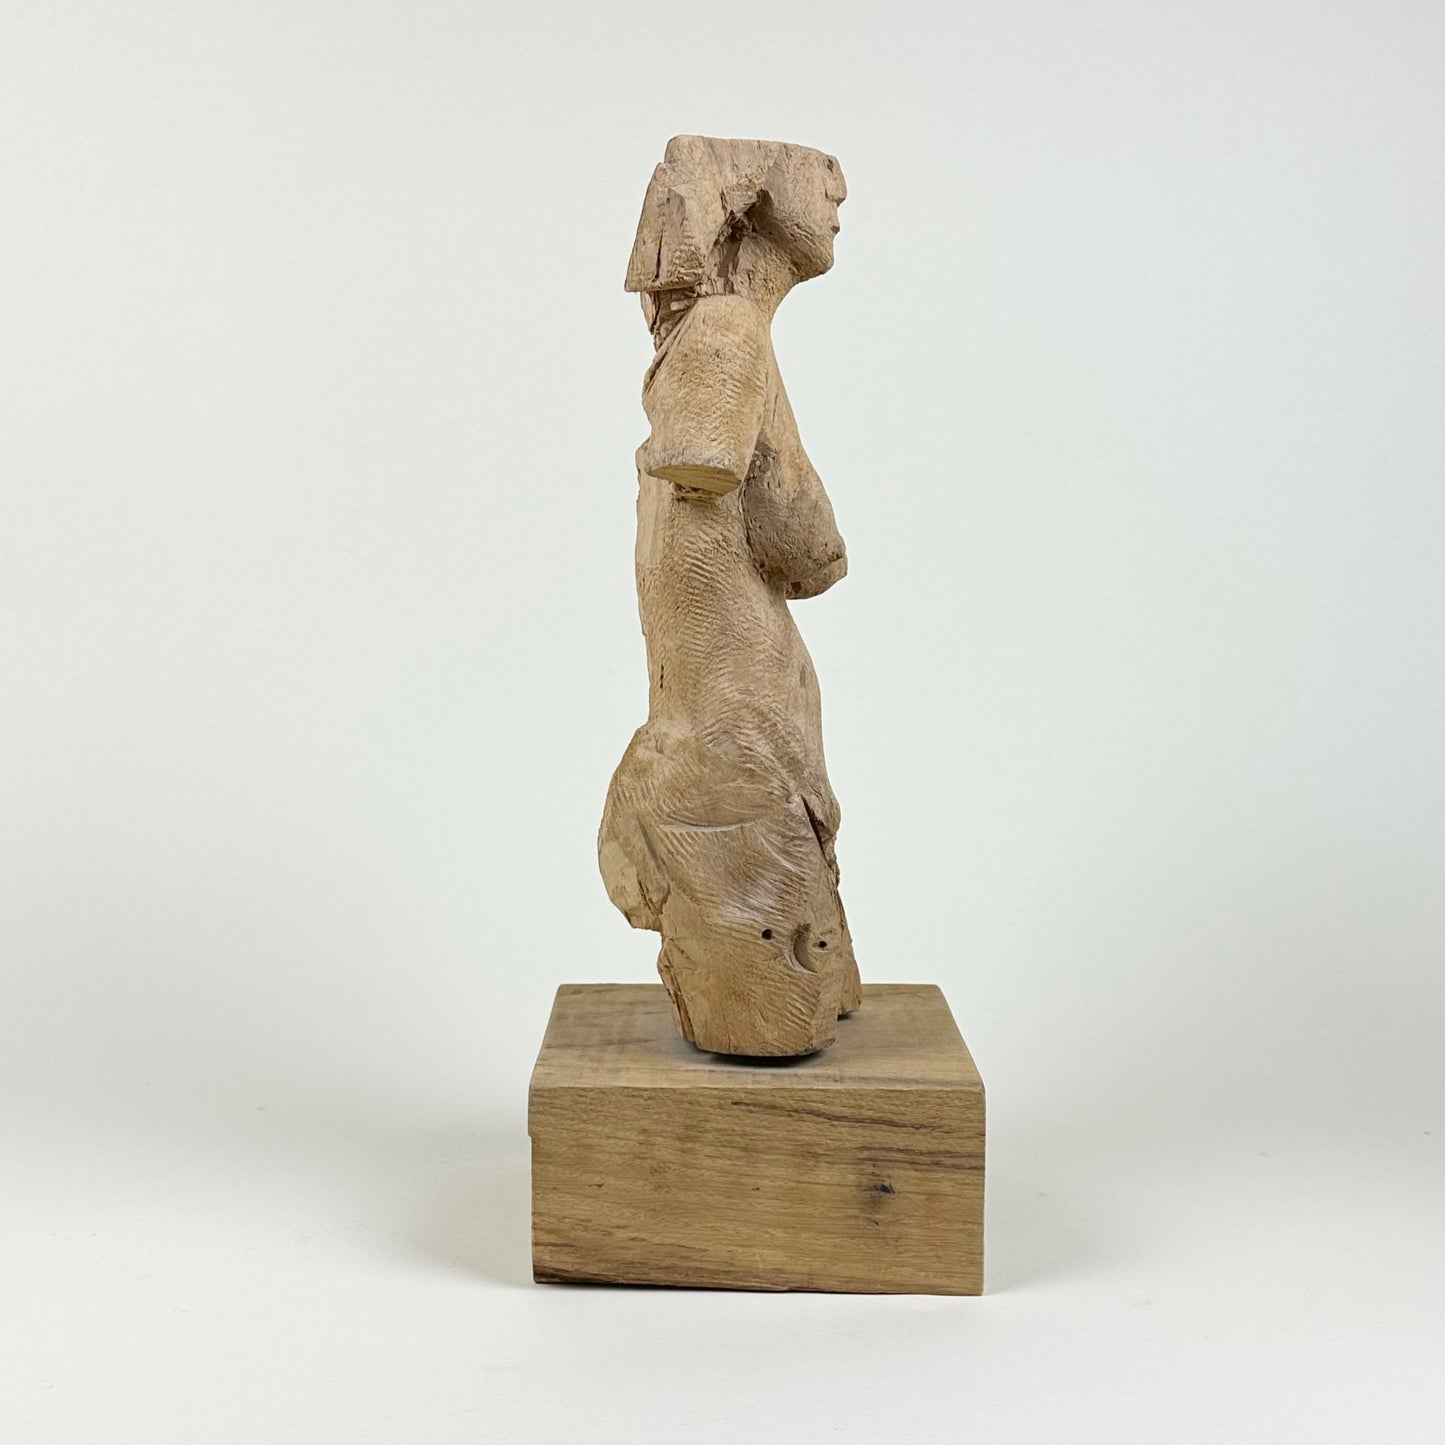 Wooden sculpture/bust of a woman, vintage